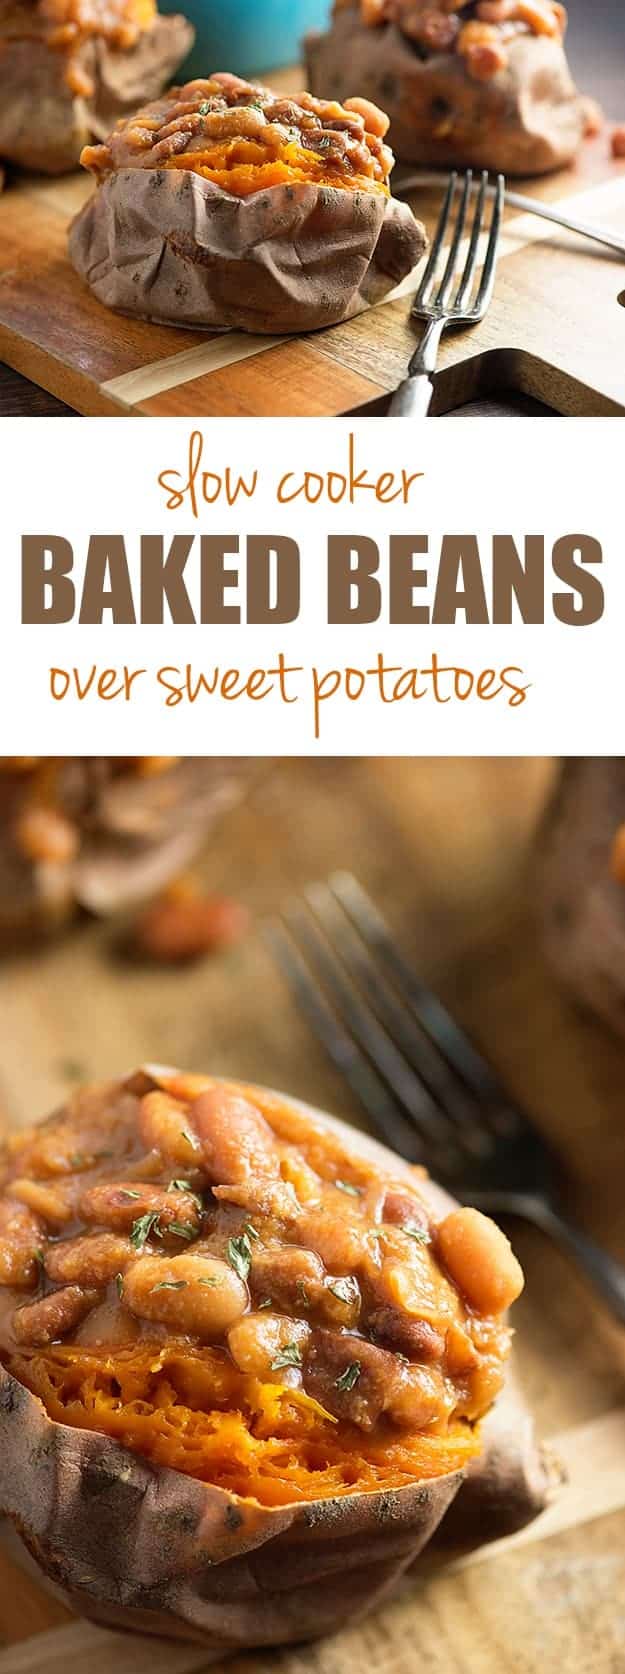 These crock pot baked beans are loaded with diced ham! Serve them over baked sweet potatoes for an easy dinner!